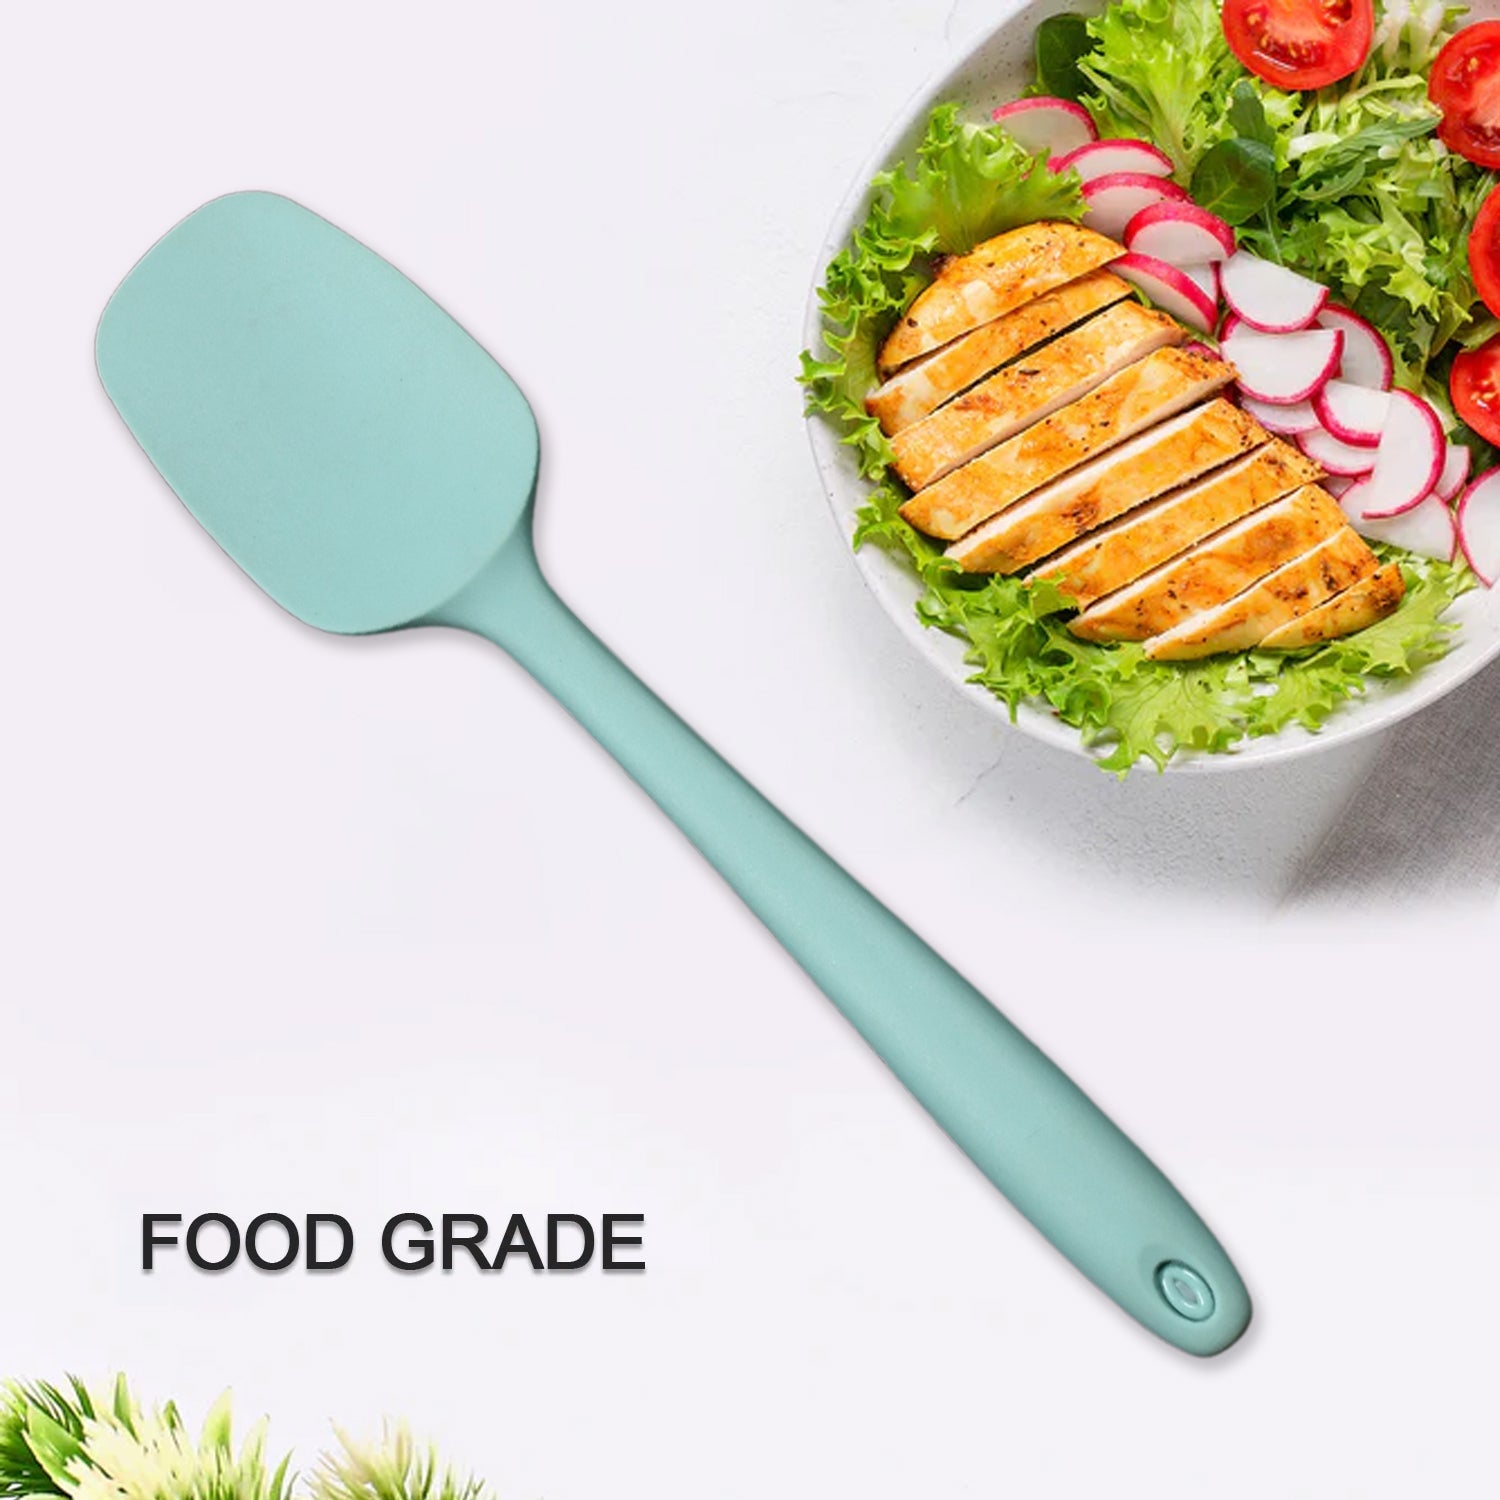 5426 Food Grade Silicone Rubber Spatula Set Kitchen Utensils for Baking, Cooking, High Heat Resistant Non Stick Dishwasher Safe BPA-Free (27cm) 